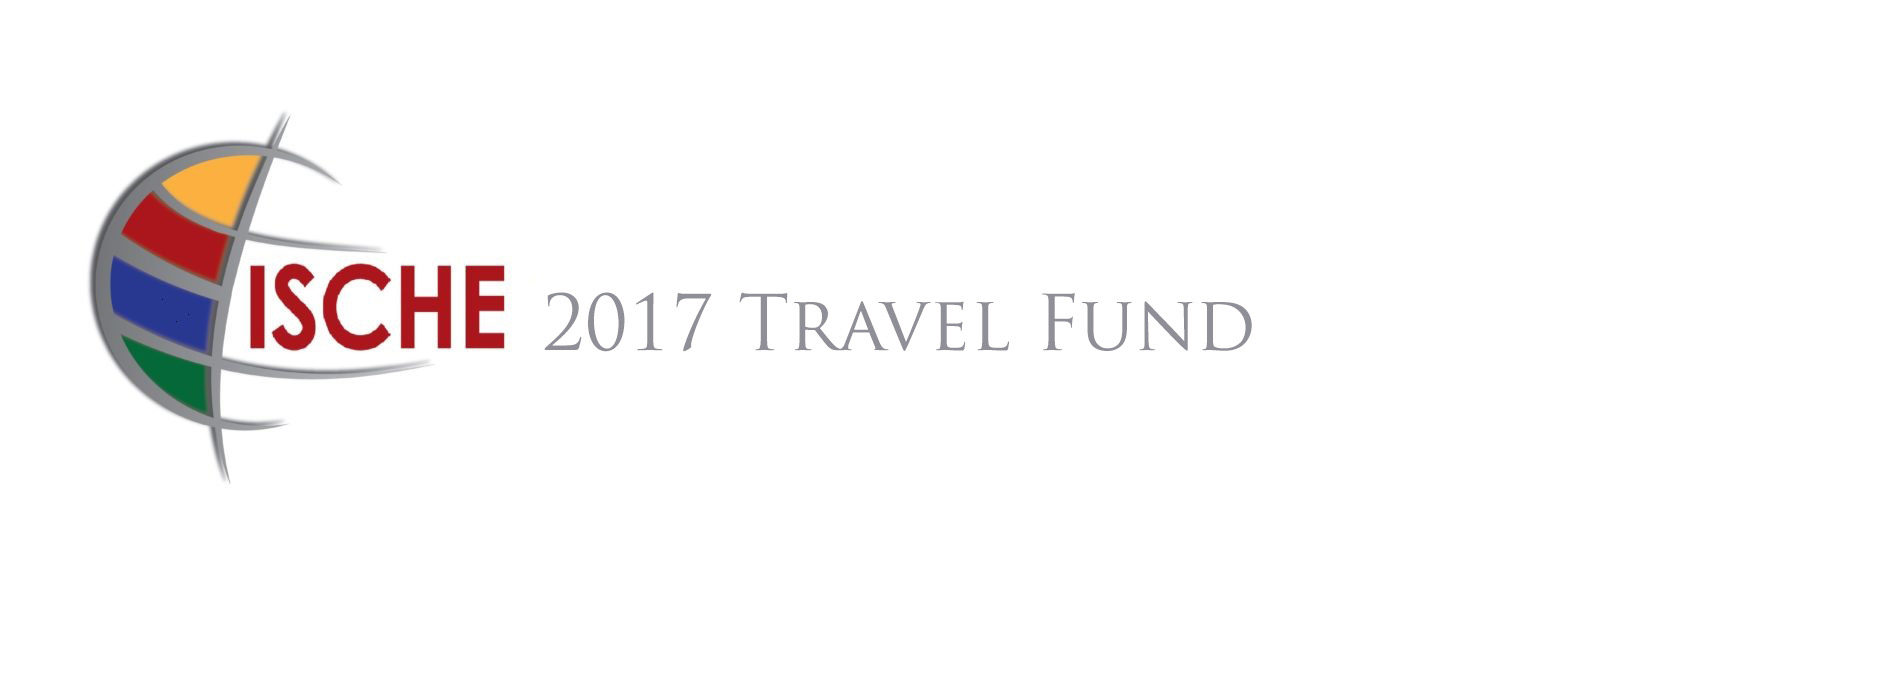 Travel funds to attend the annual conference